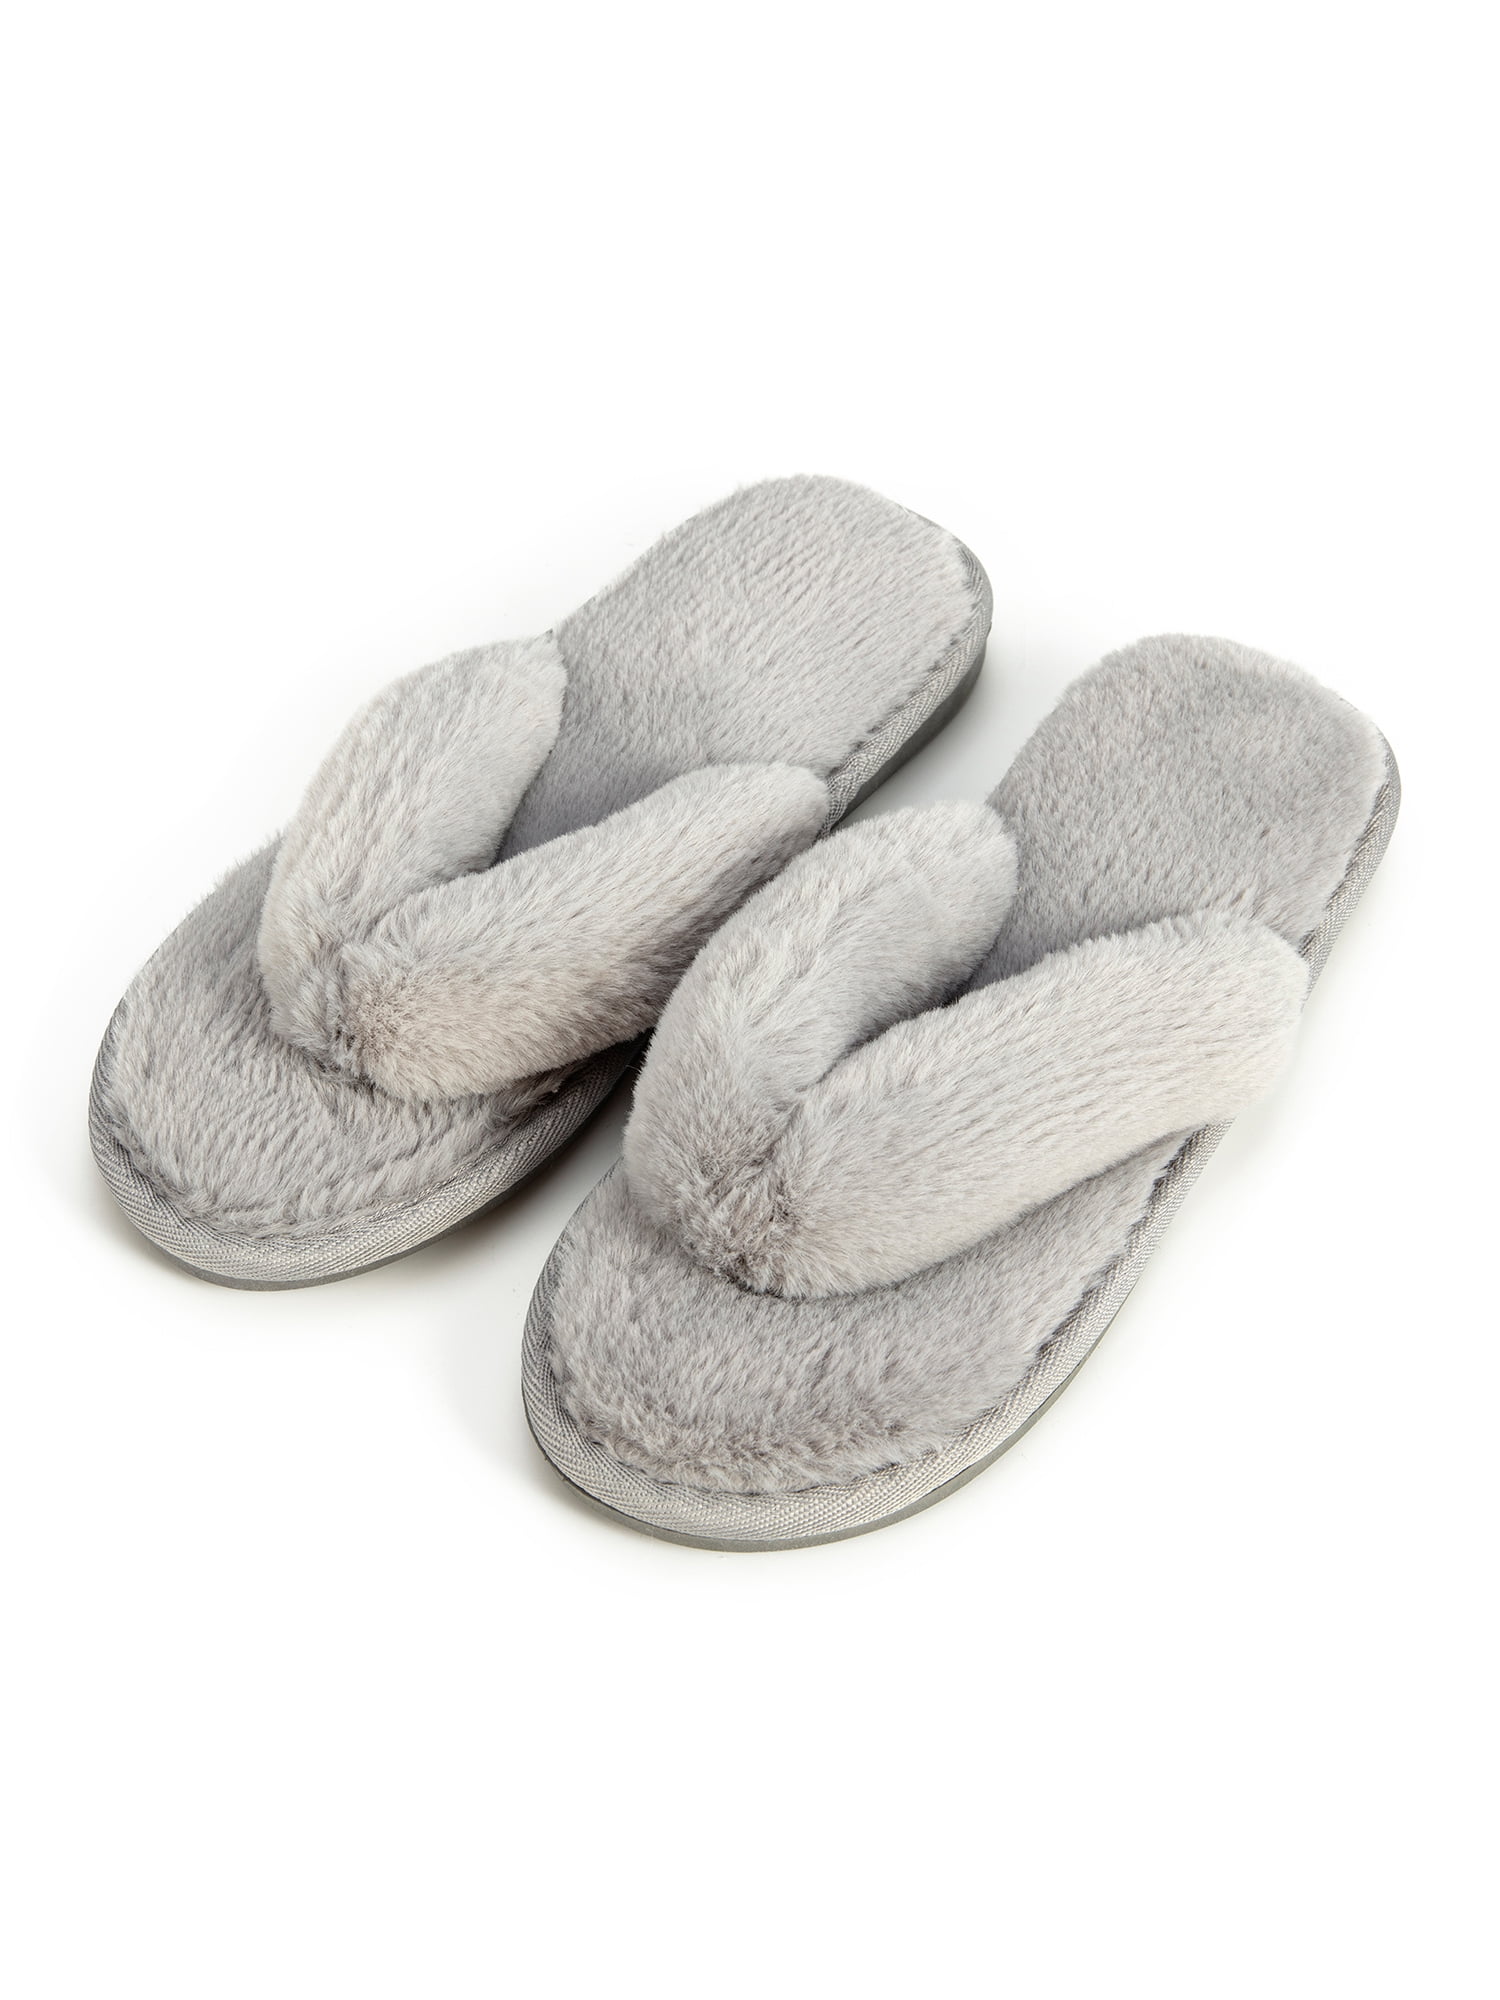 Womens Slippers With Arch Support